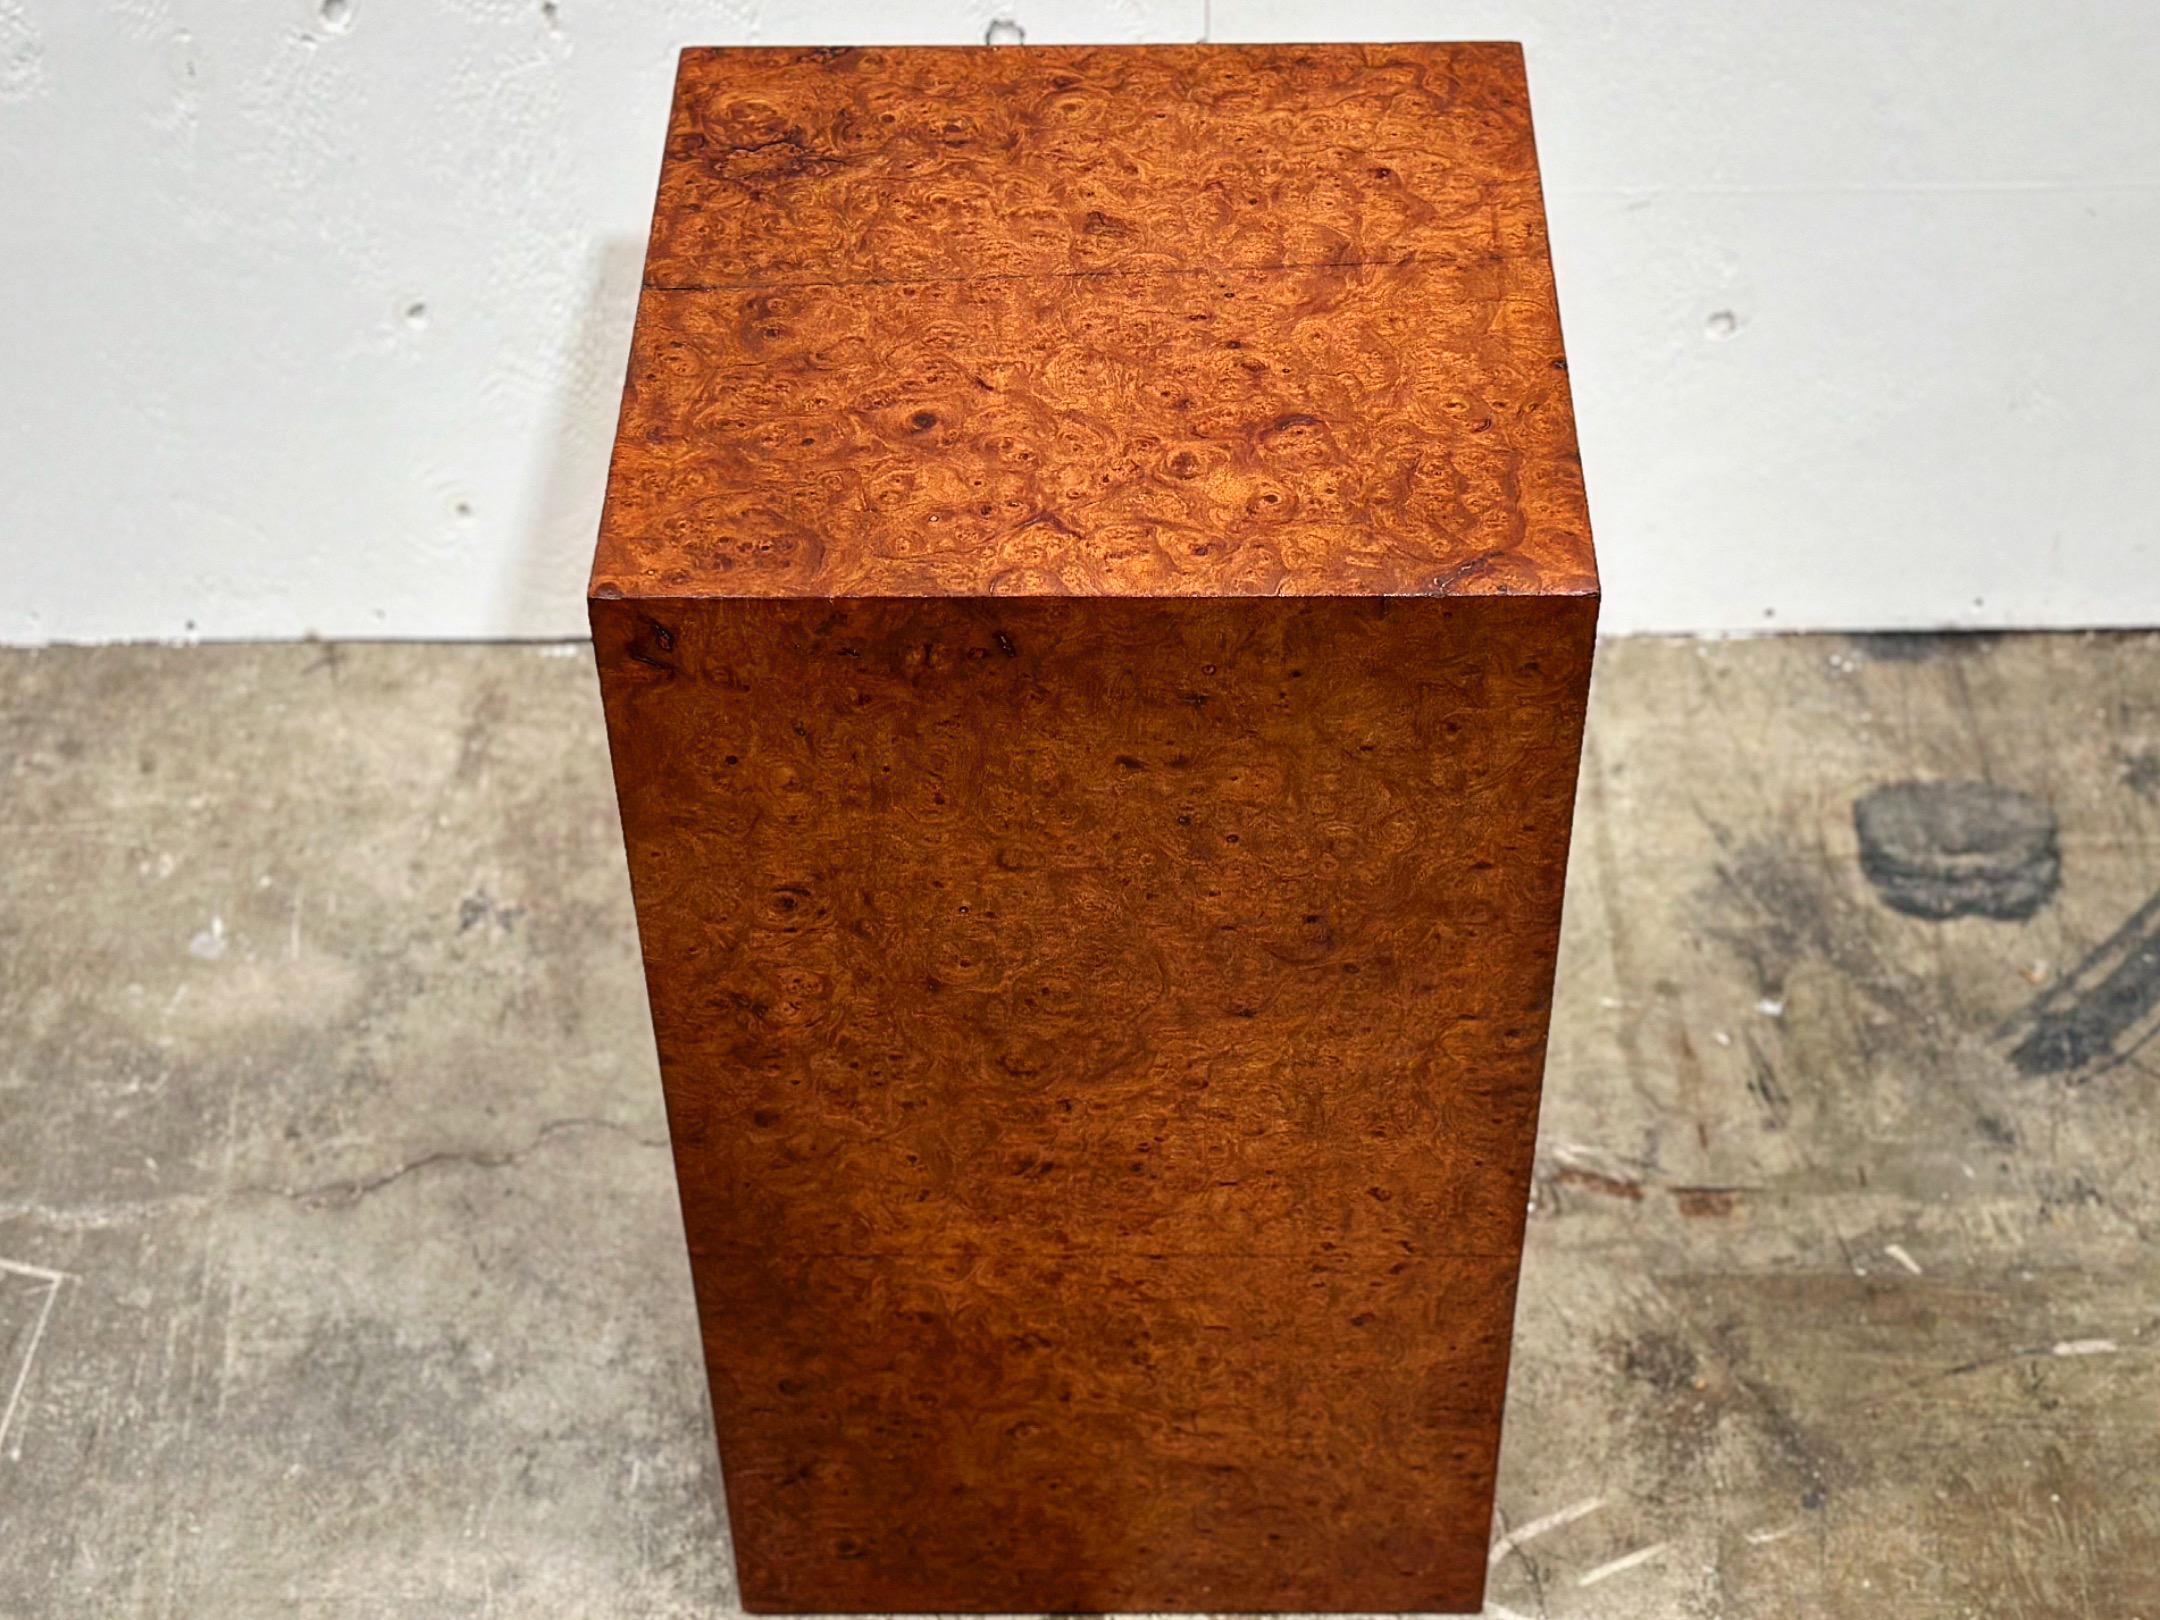 Vintage mid century modern burled olivewood modernist display pedestal by Milo Baughman for Thayer Coggin, circa 1970's. Beautiful organic modernist minimalist design.
Gorgeous highly figurative burl grain.
Excellent overall condition with no issues